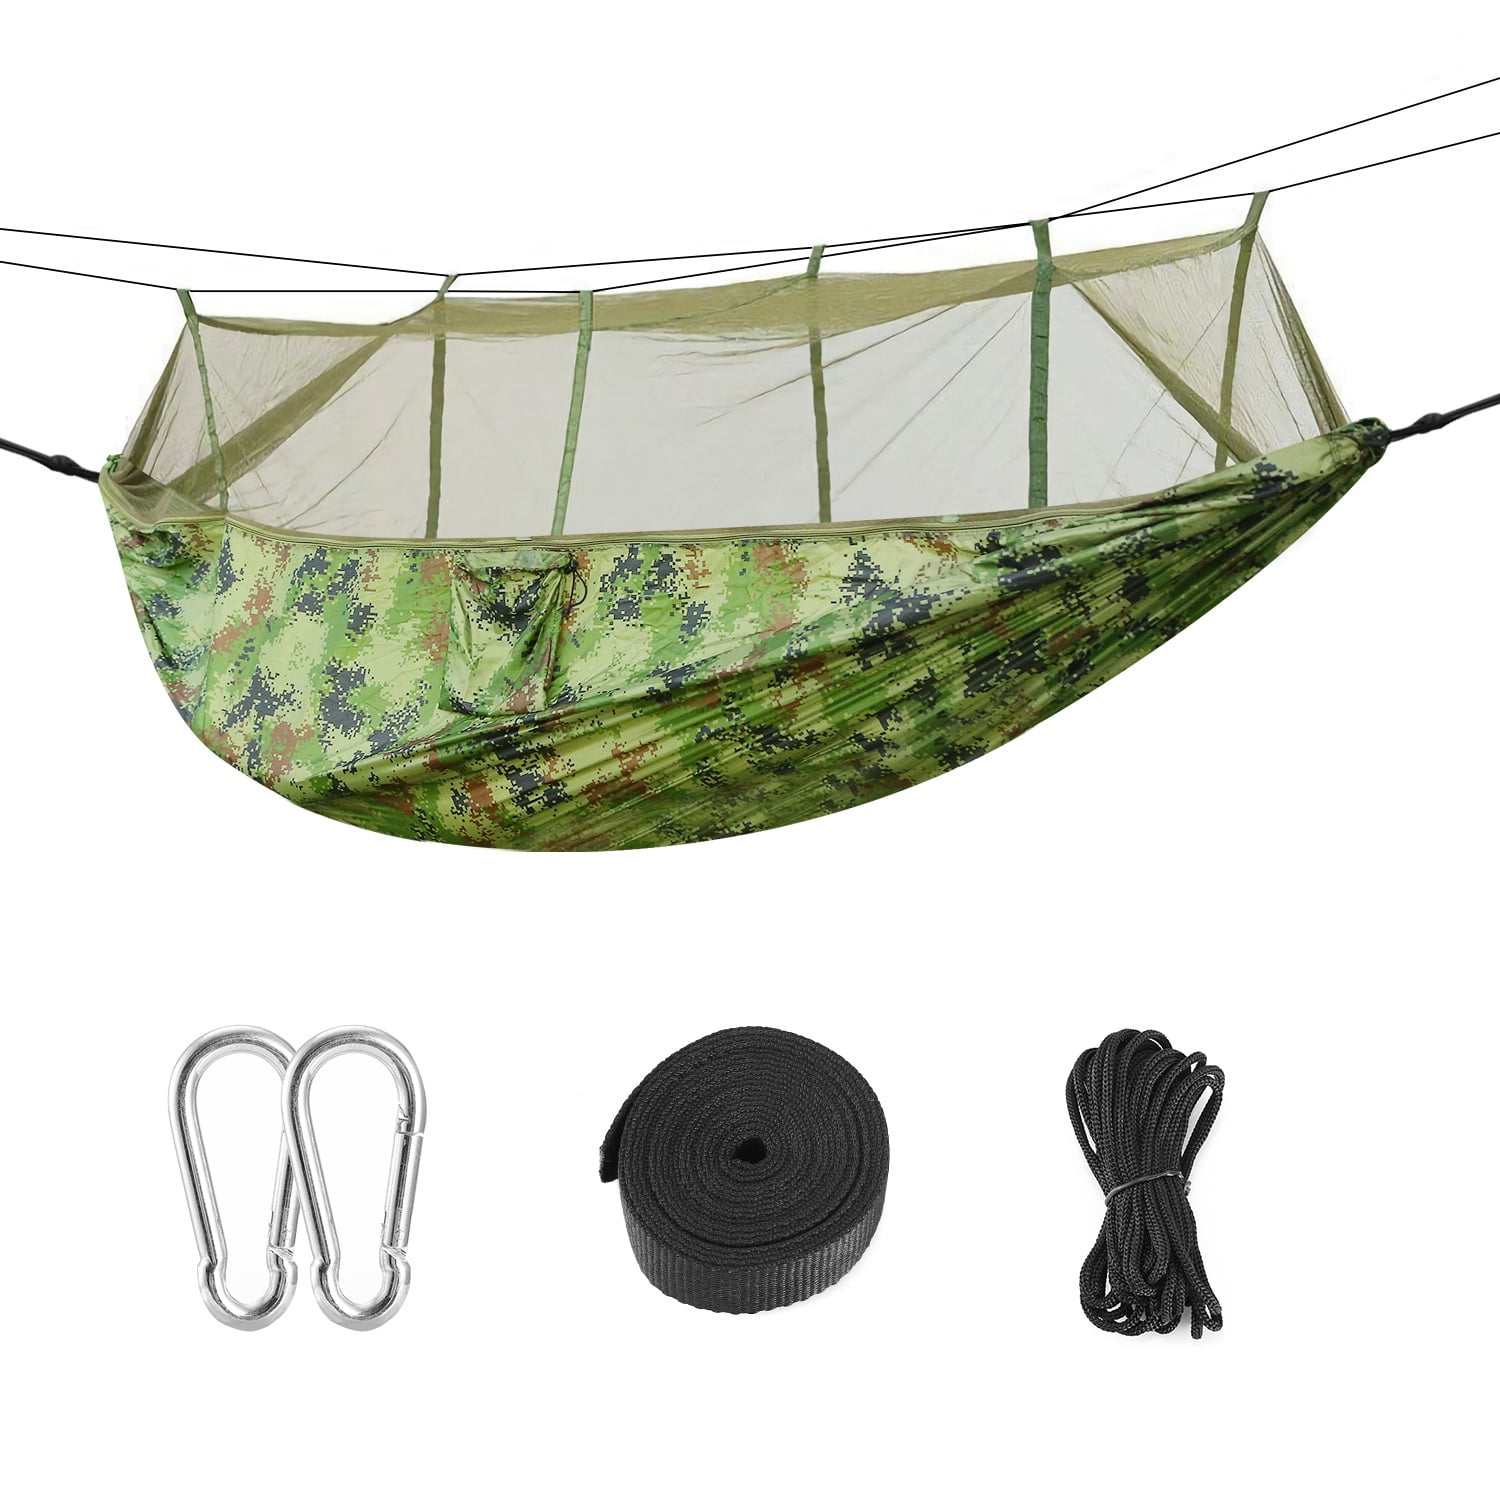 Portable Double Outdoor Person Travel Camping Hammock Hang Bed with Mosquito Net 